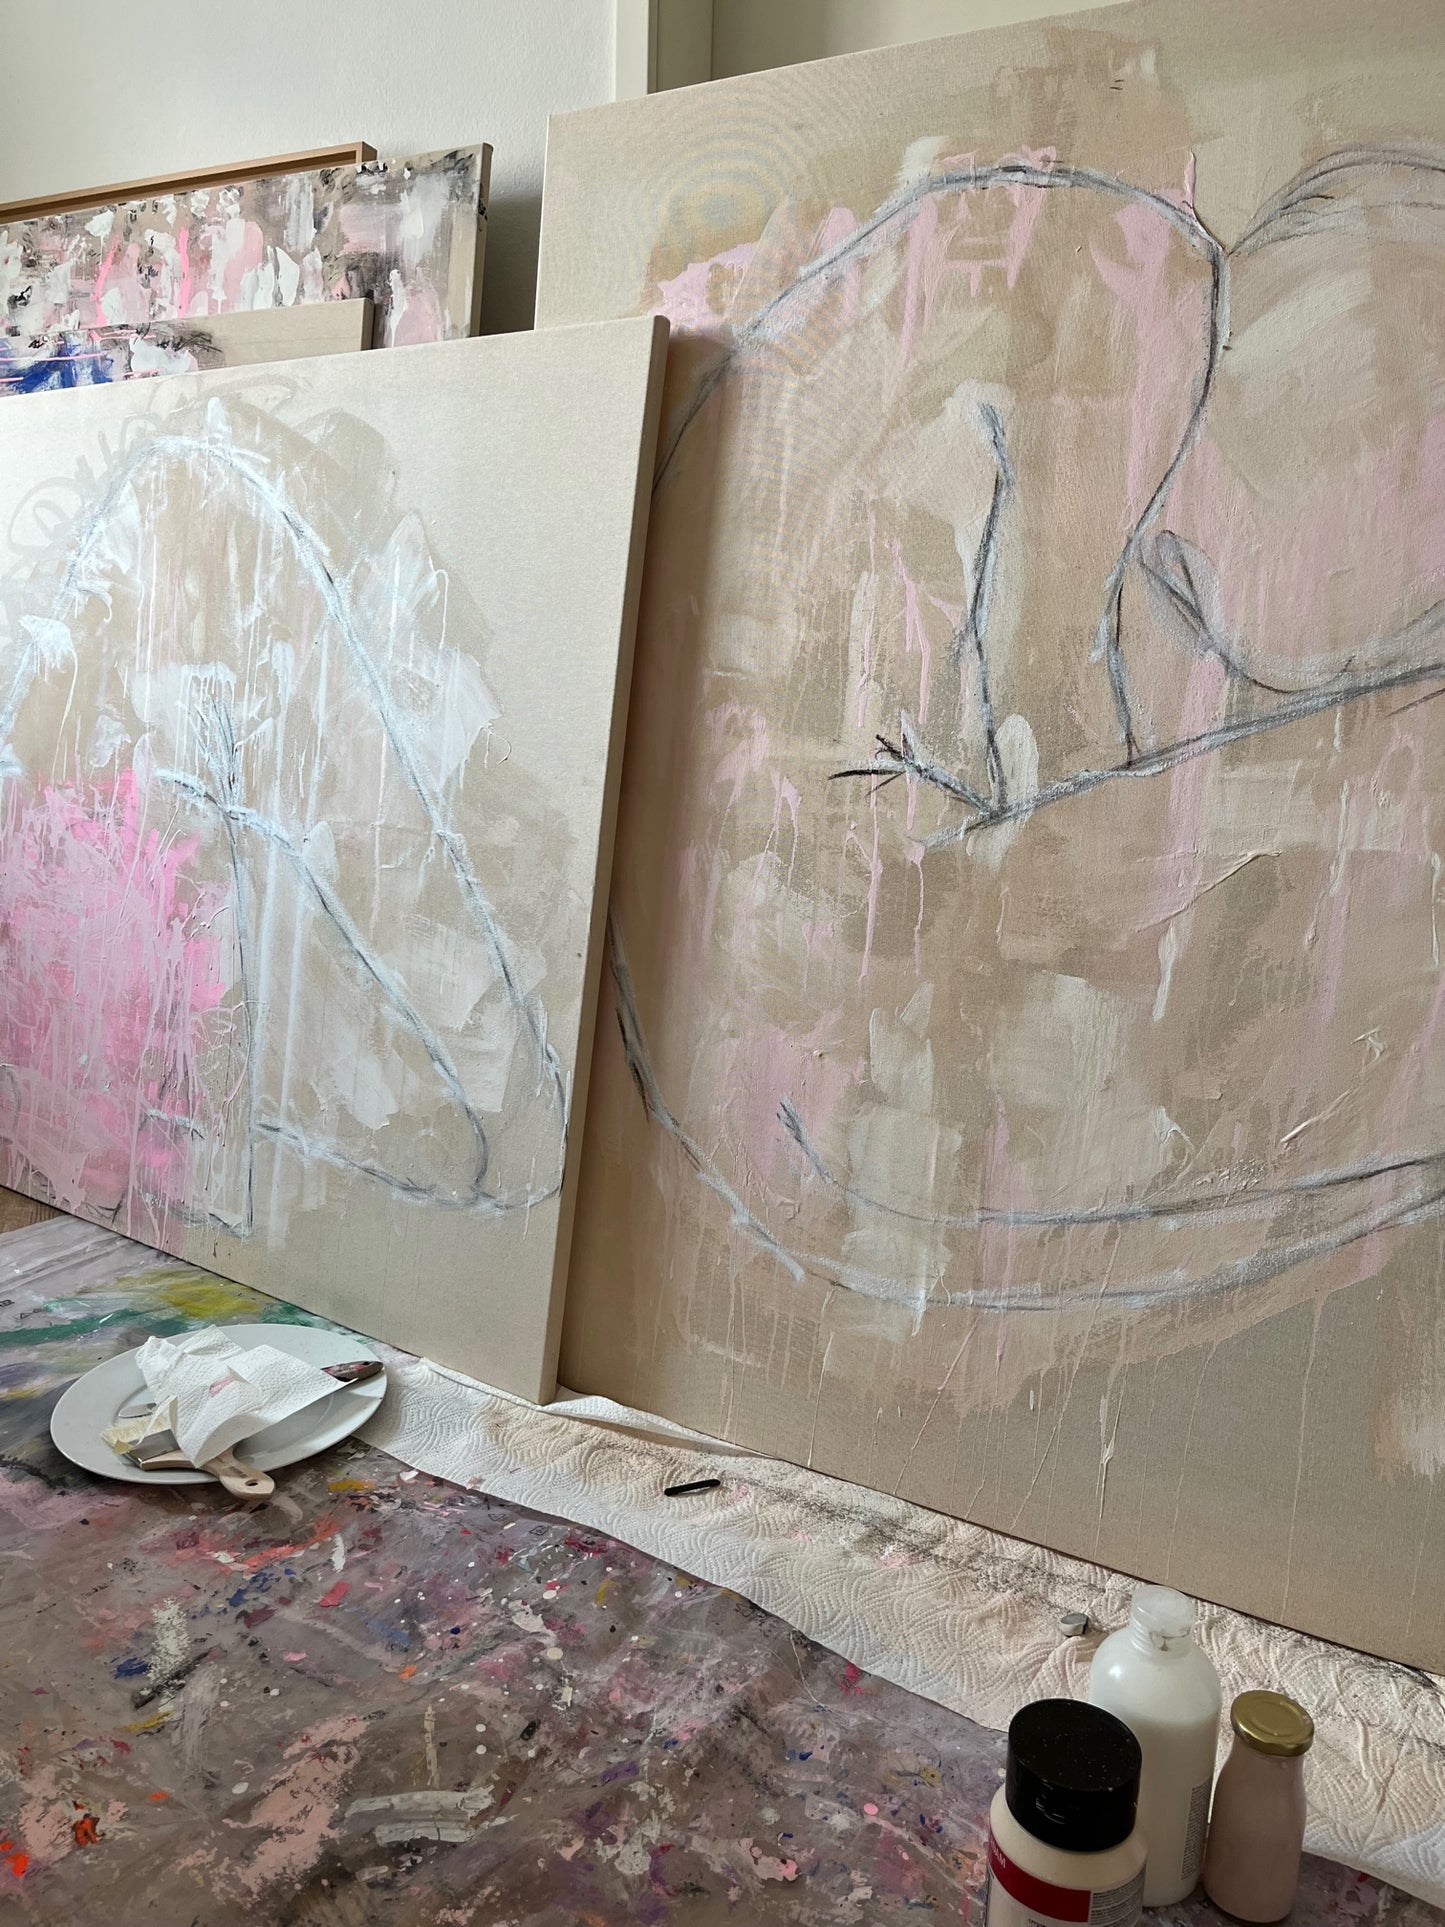 "Abstraction, Figuration and Emotion" Painting Workshop in Munich, Germany